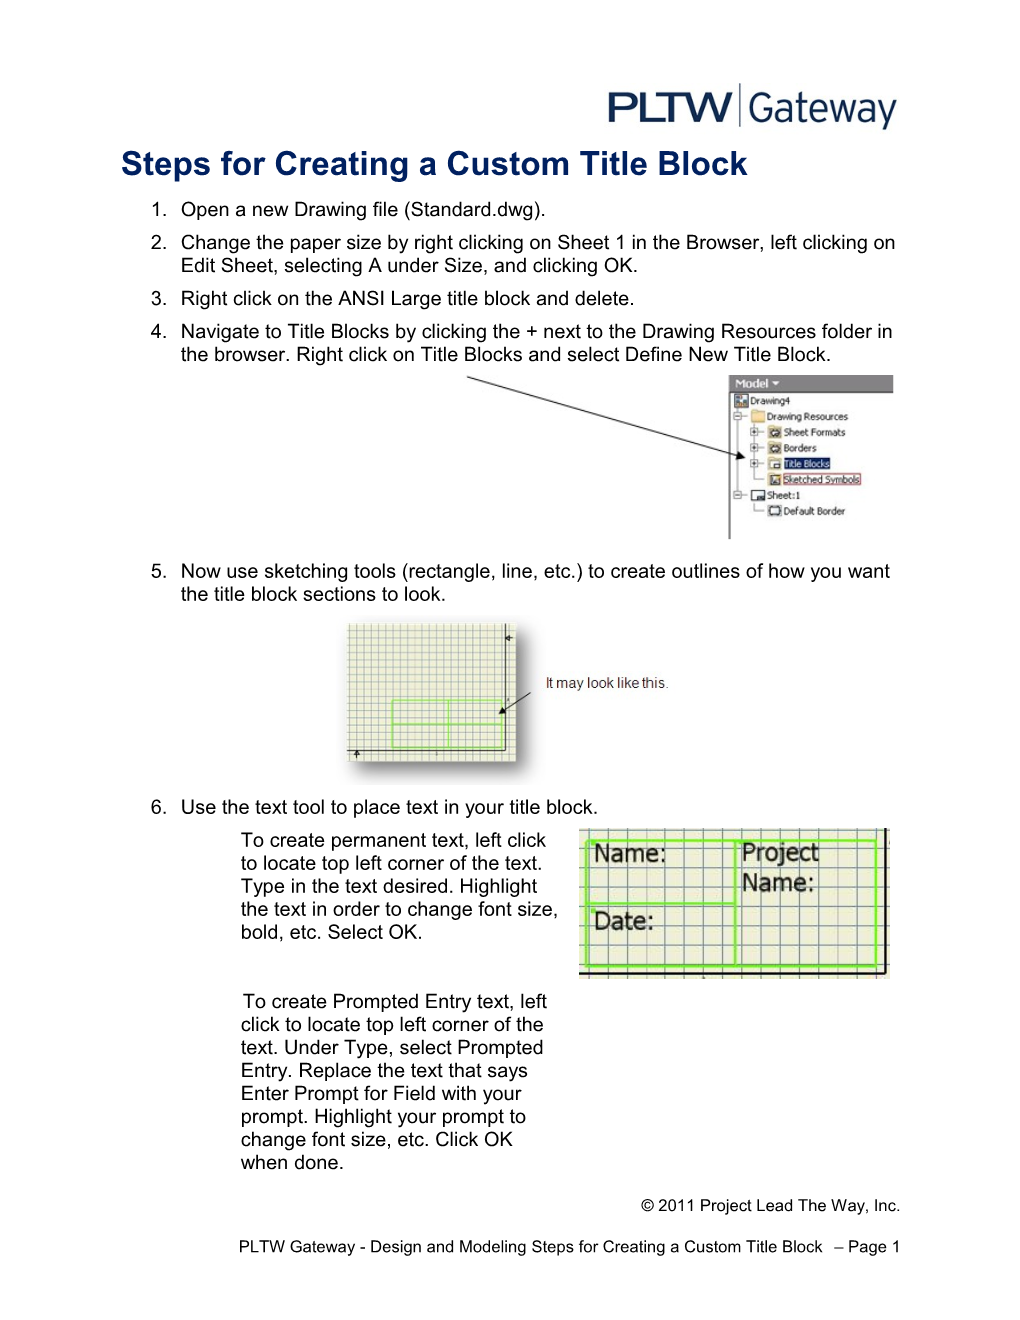 Steps for Creating a Custom Title Block